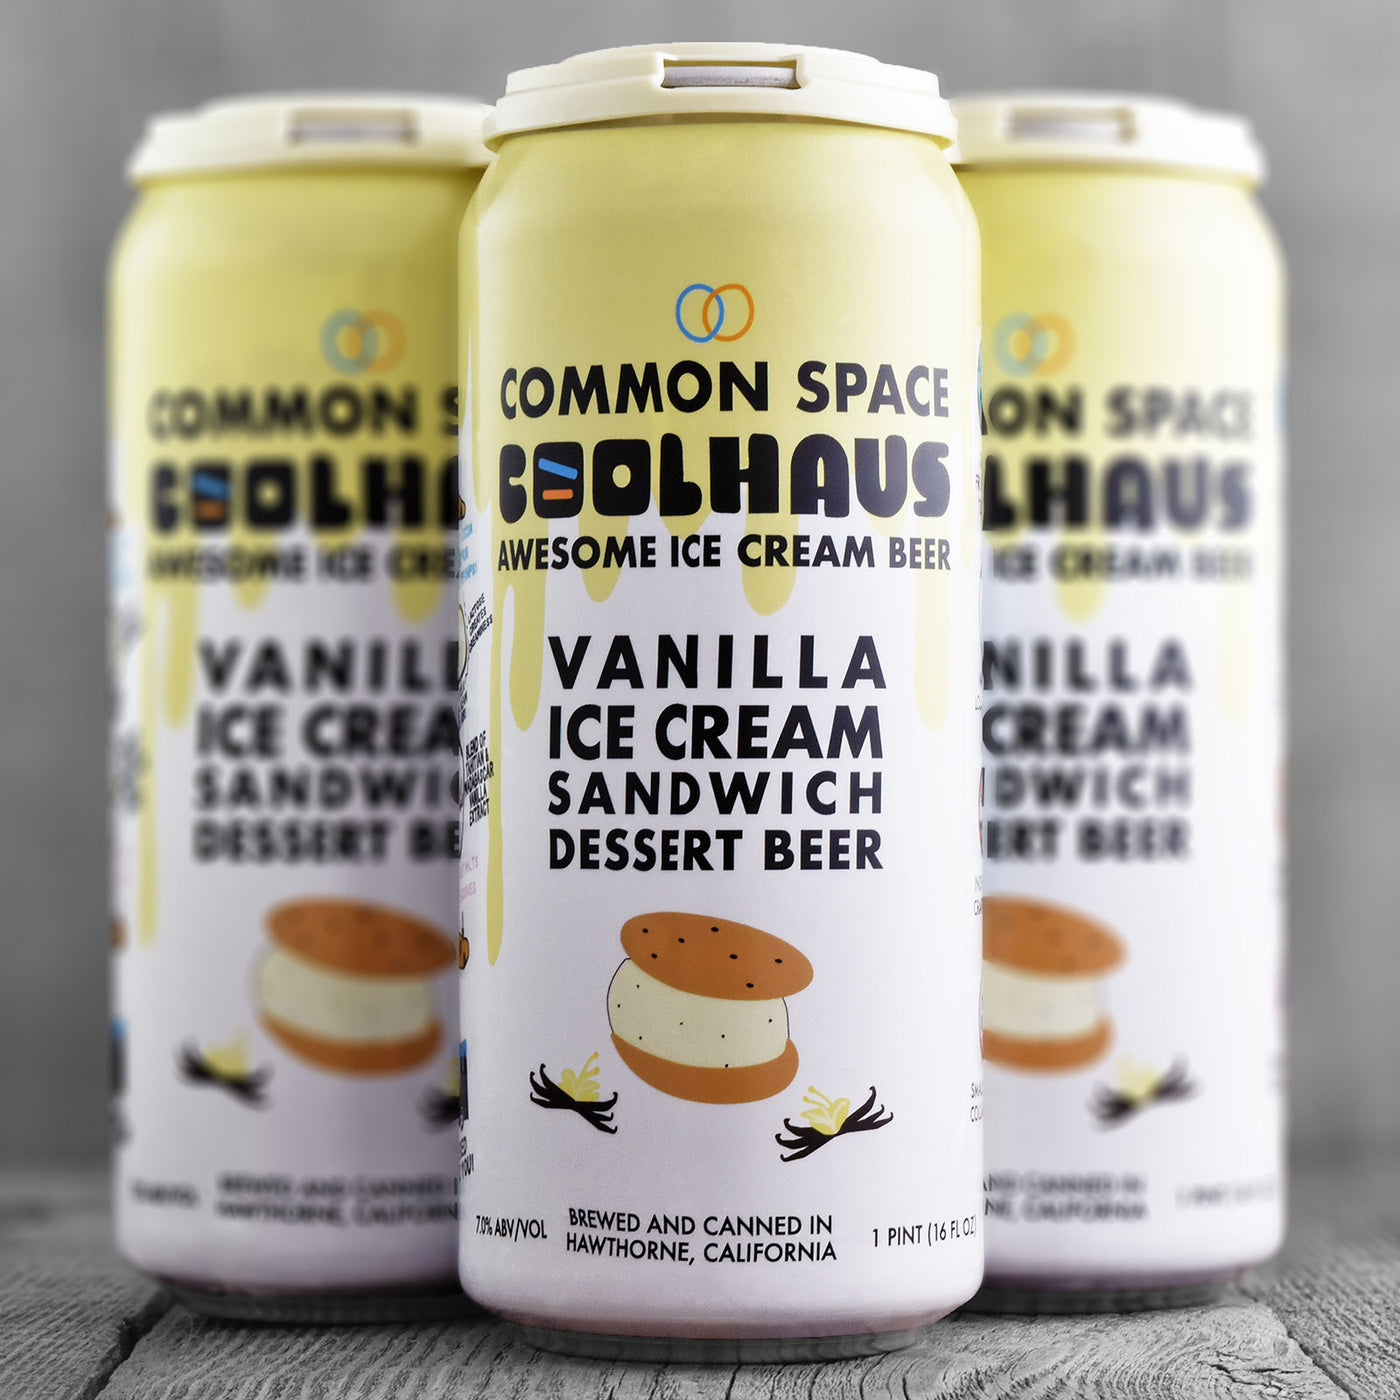 Common Space Coolhaus Awesome Ice Cream Beer